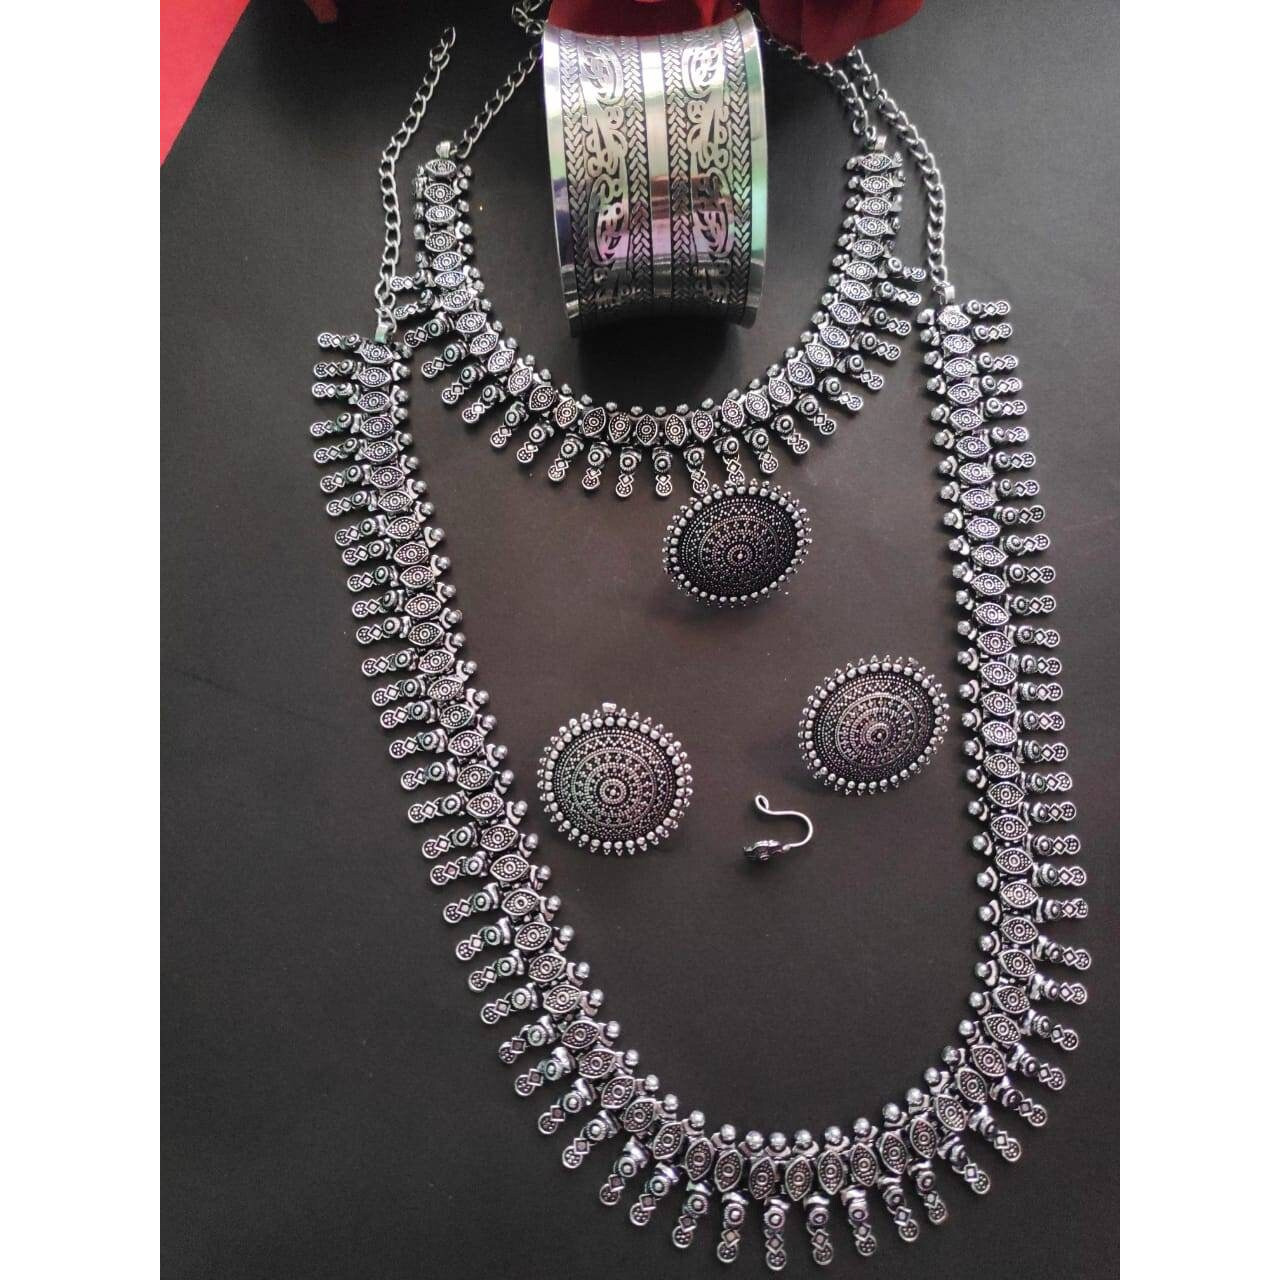 Add charm and Charisma to your beautiful personality with this exquisitely designed and handcrafted German Silver and oxidised necklace and earrings combo set pair it with any casual semi formal or informal attire and gather compliments for unique and classy choice ideal wear for both casual and dressy occasions